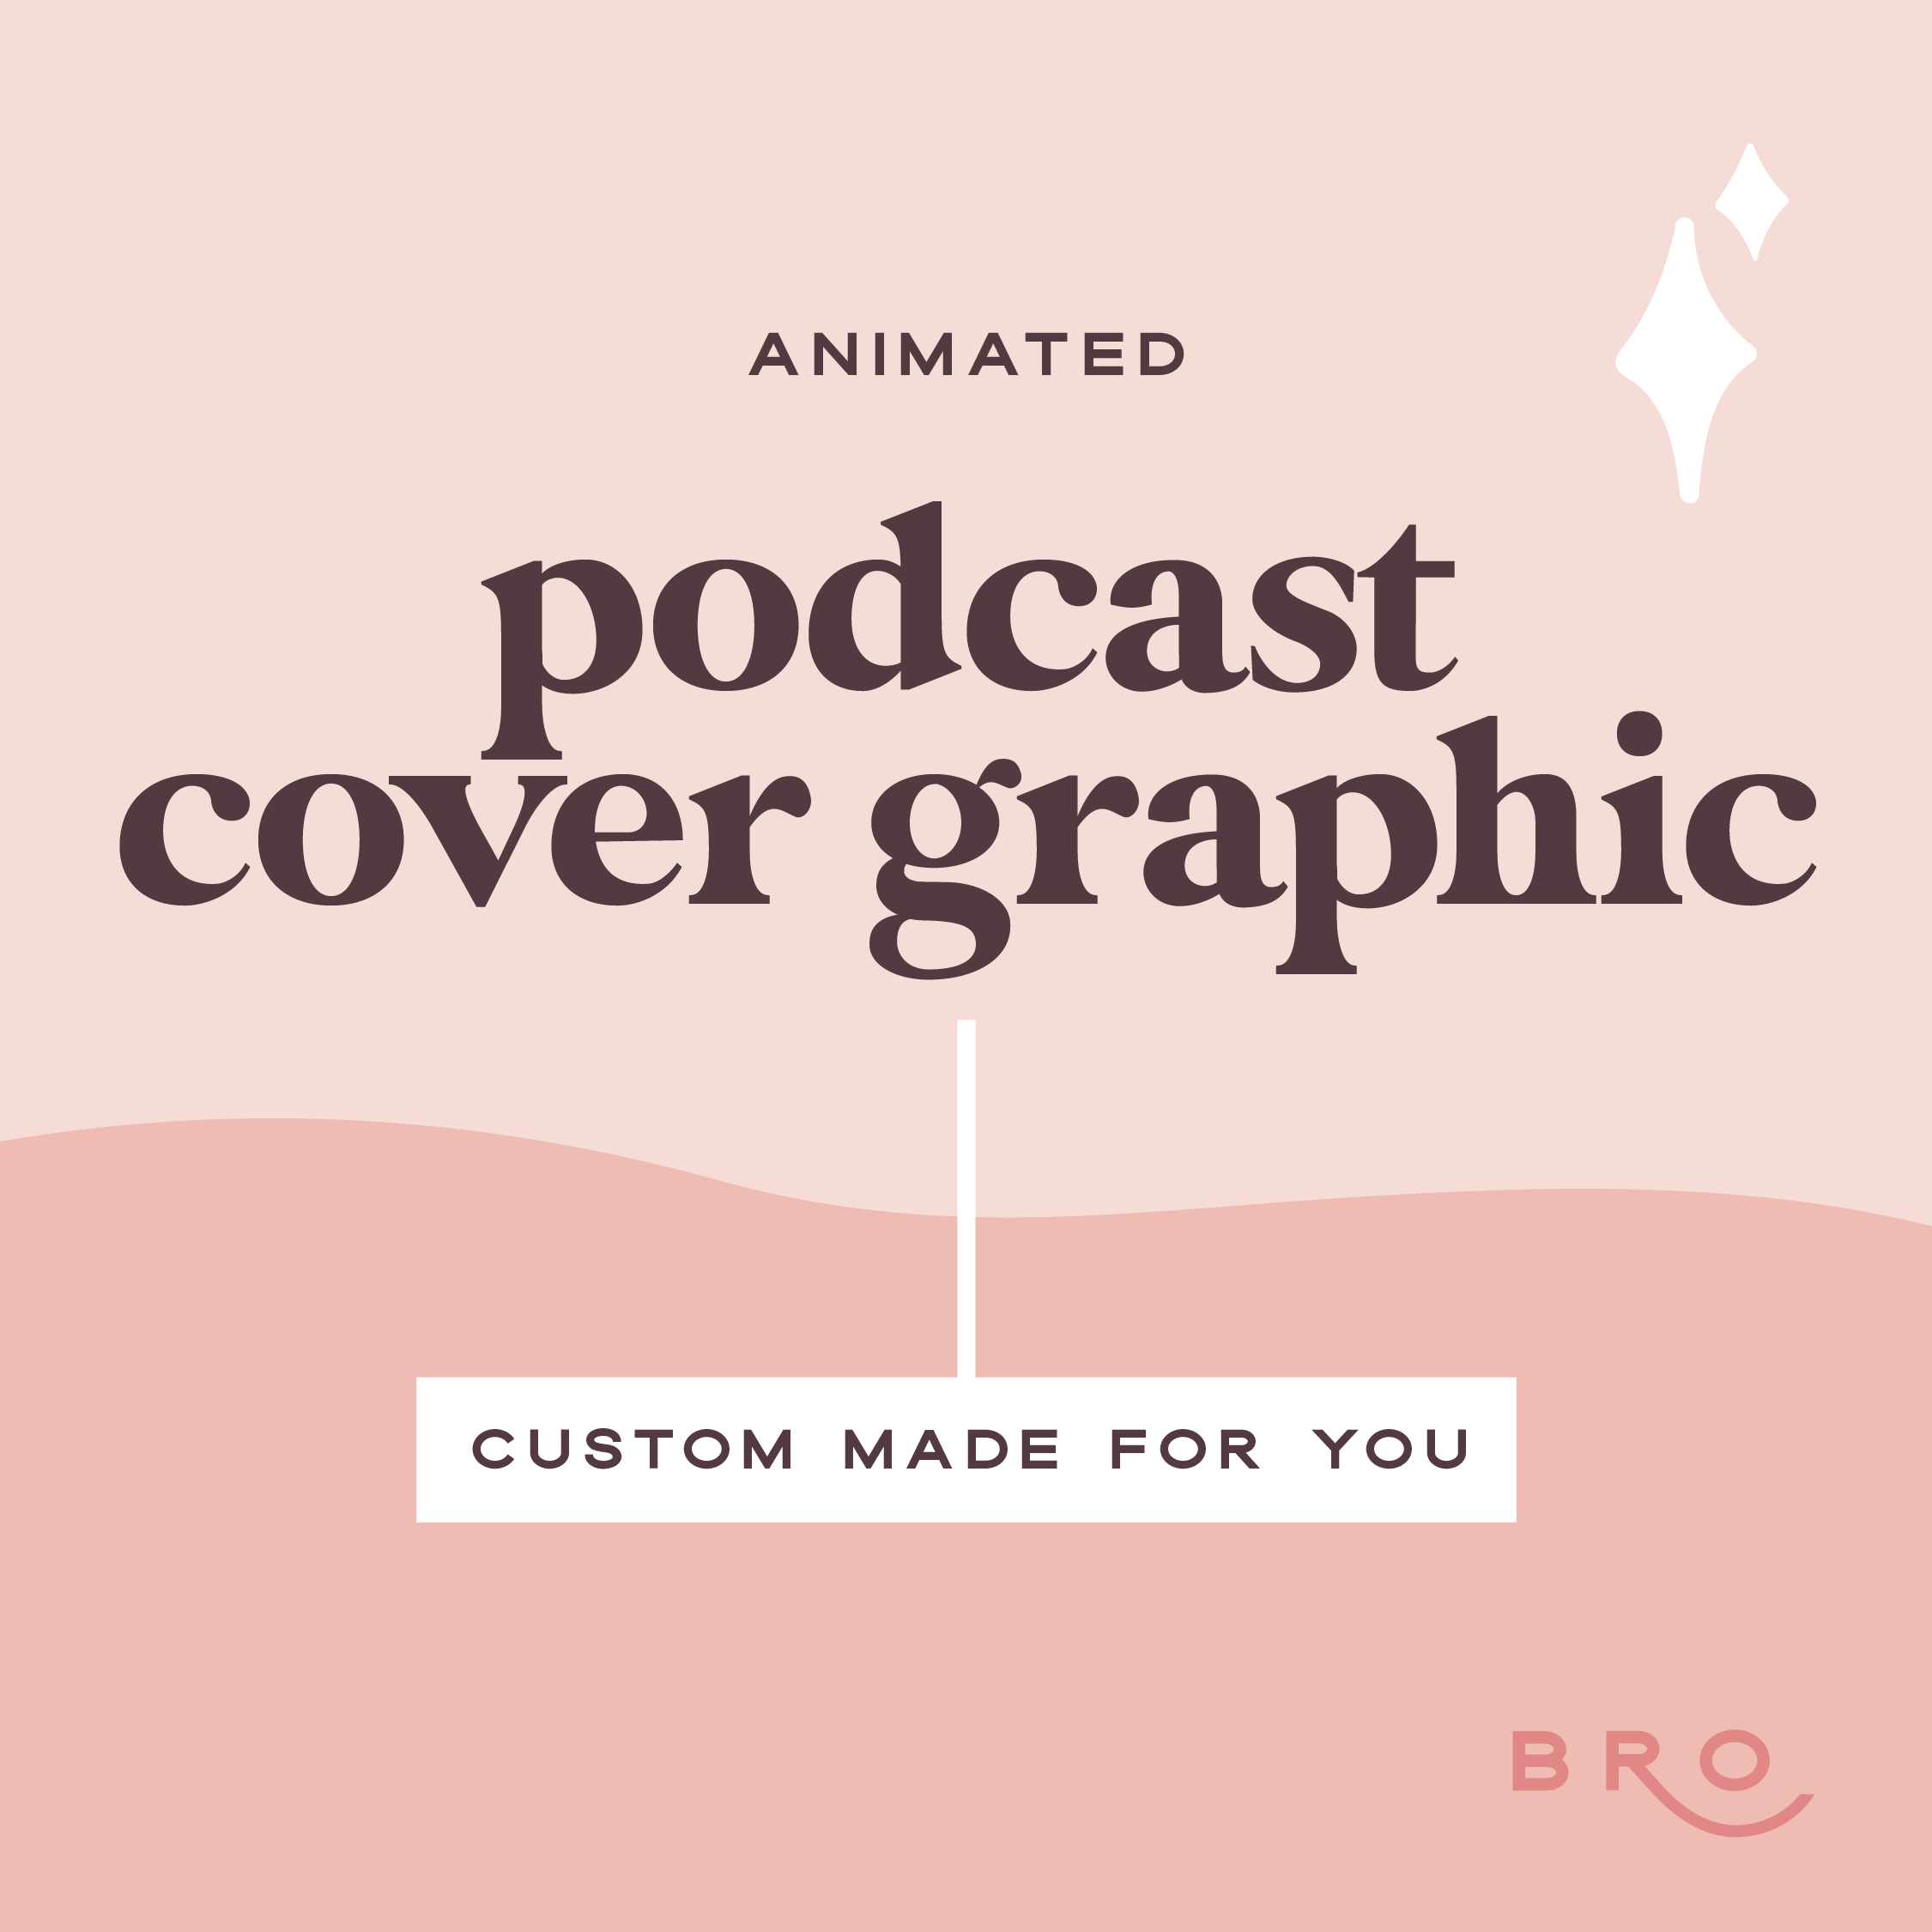 Podcast Cover Graphic